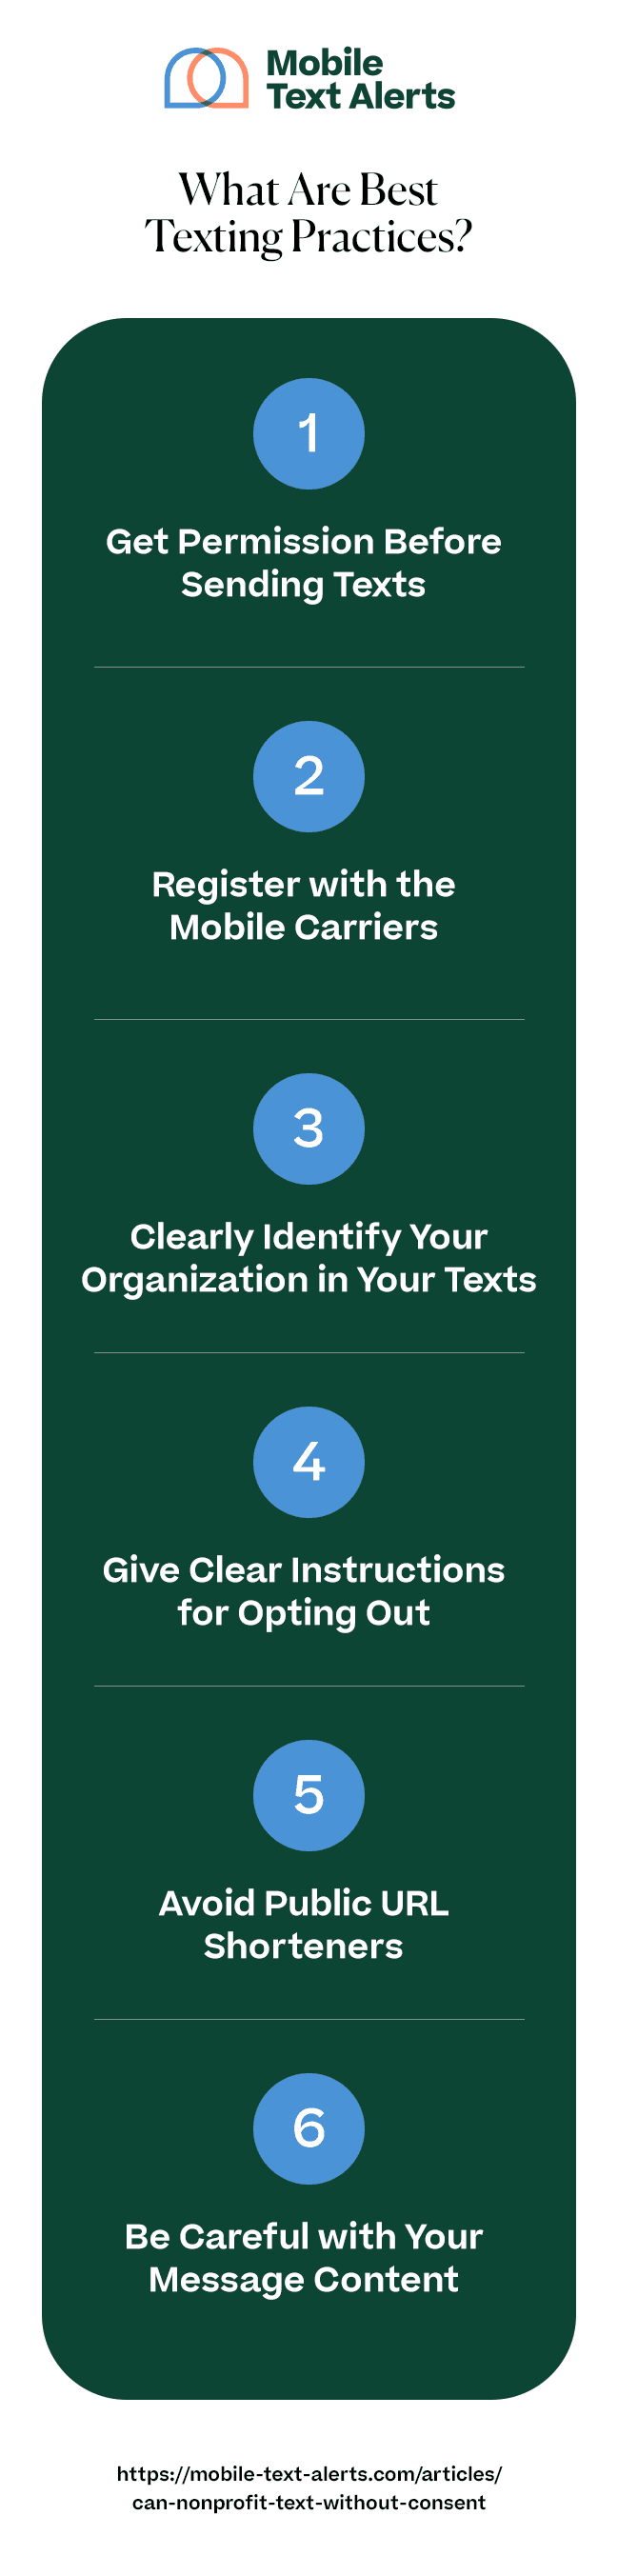 What are best texting practices - infographic